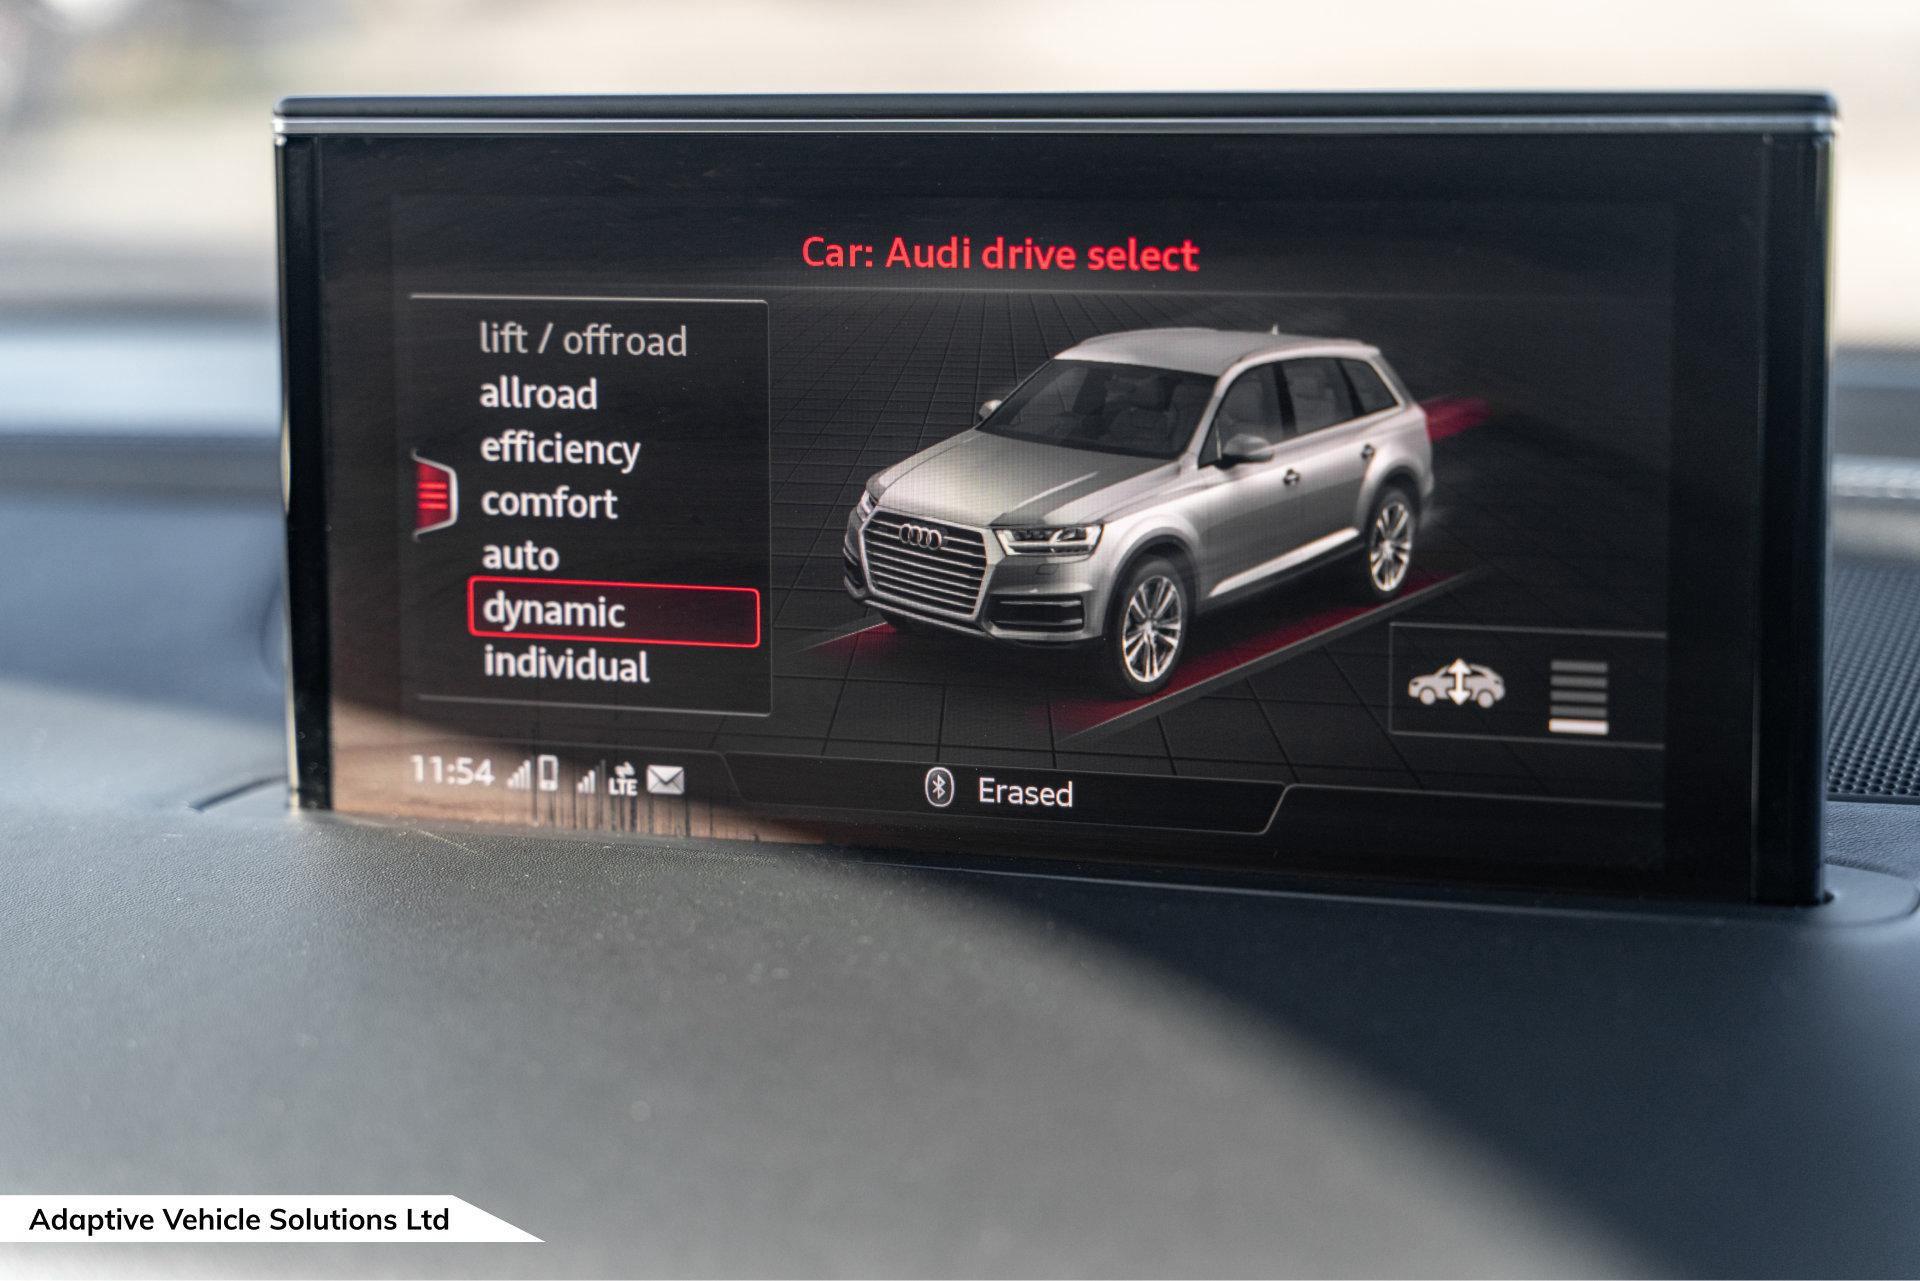 2019 Audi Q7 Vorsprung White drive select system